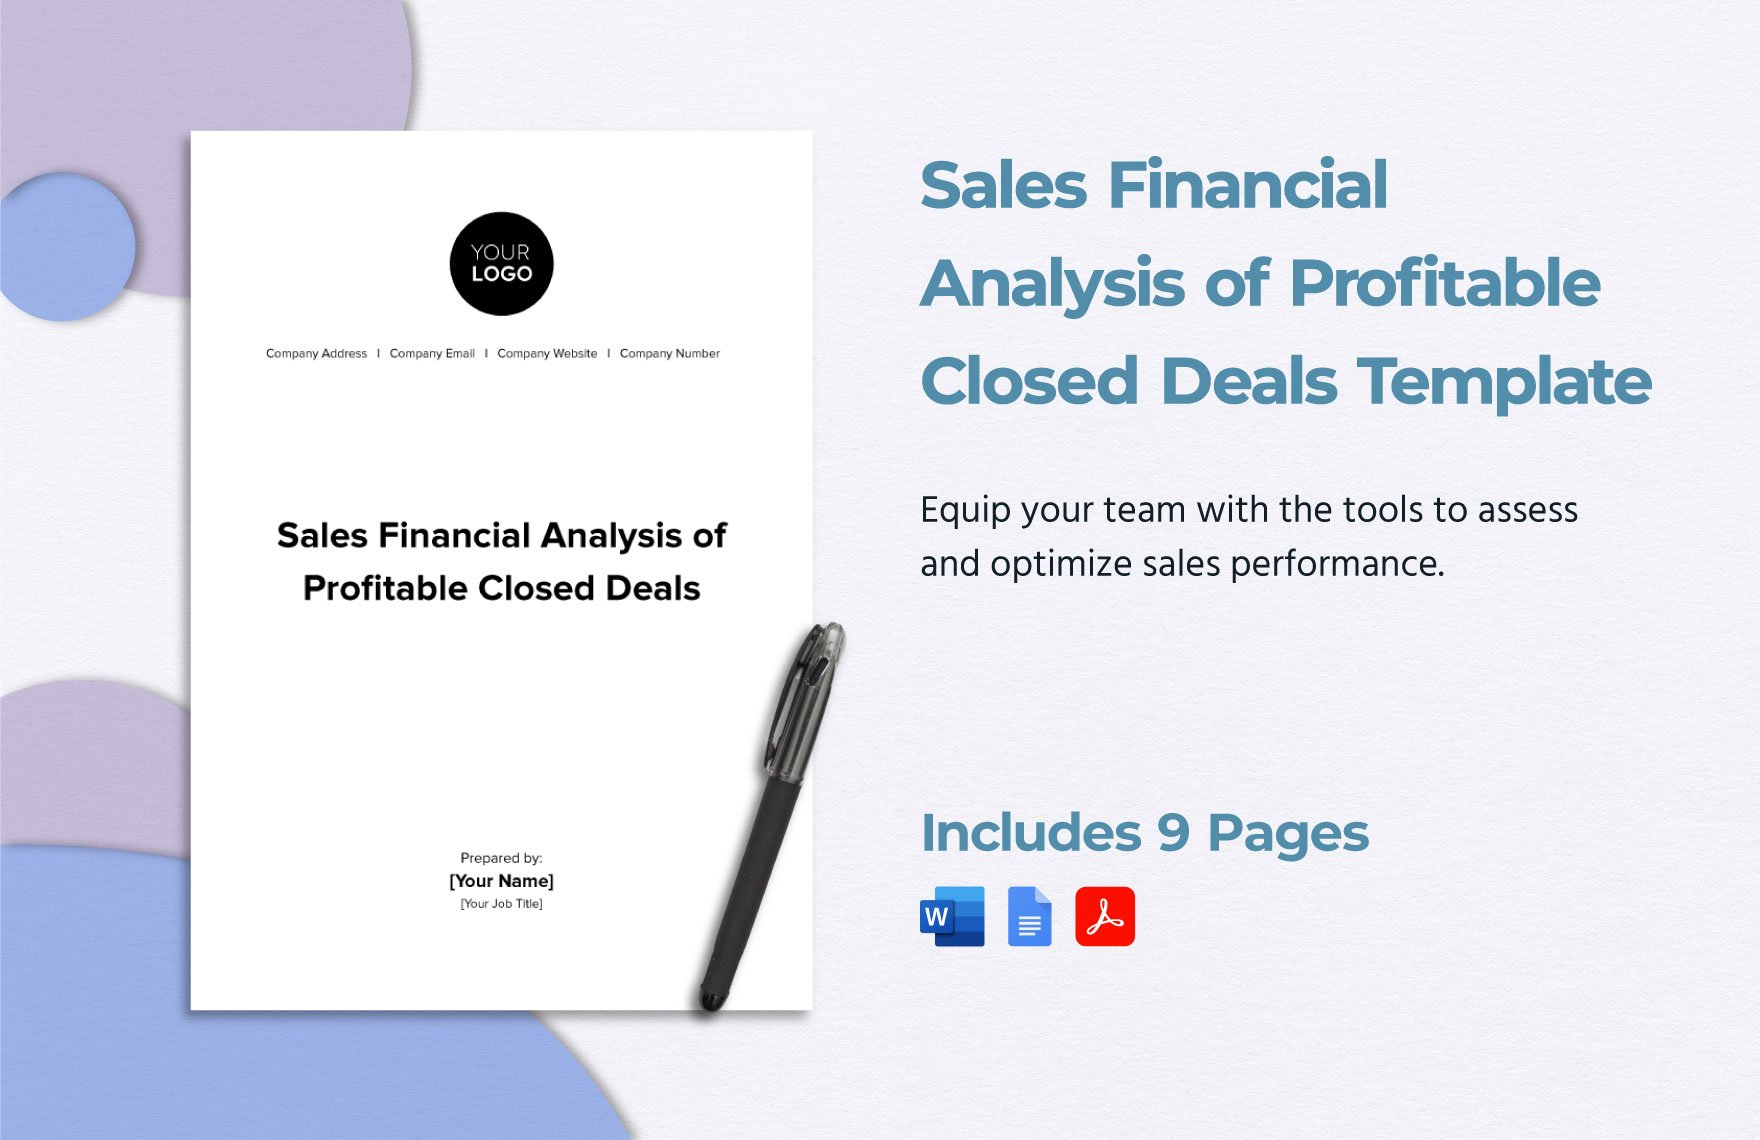 Sales Financial Analysis of Profitable Closed Deals Template